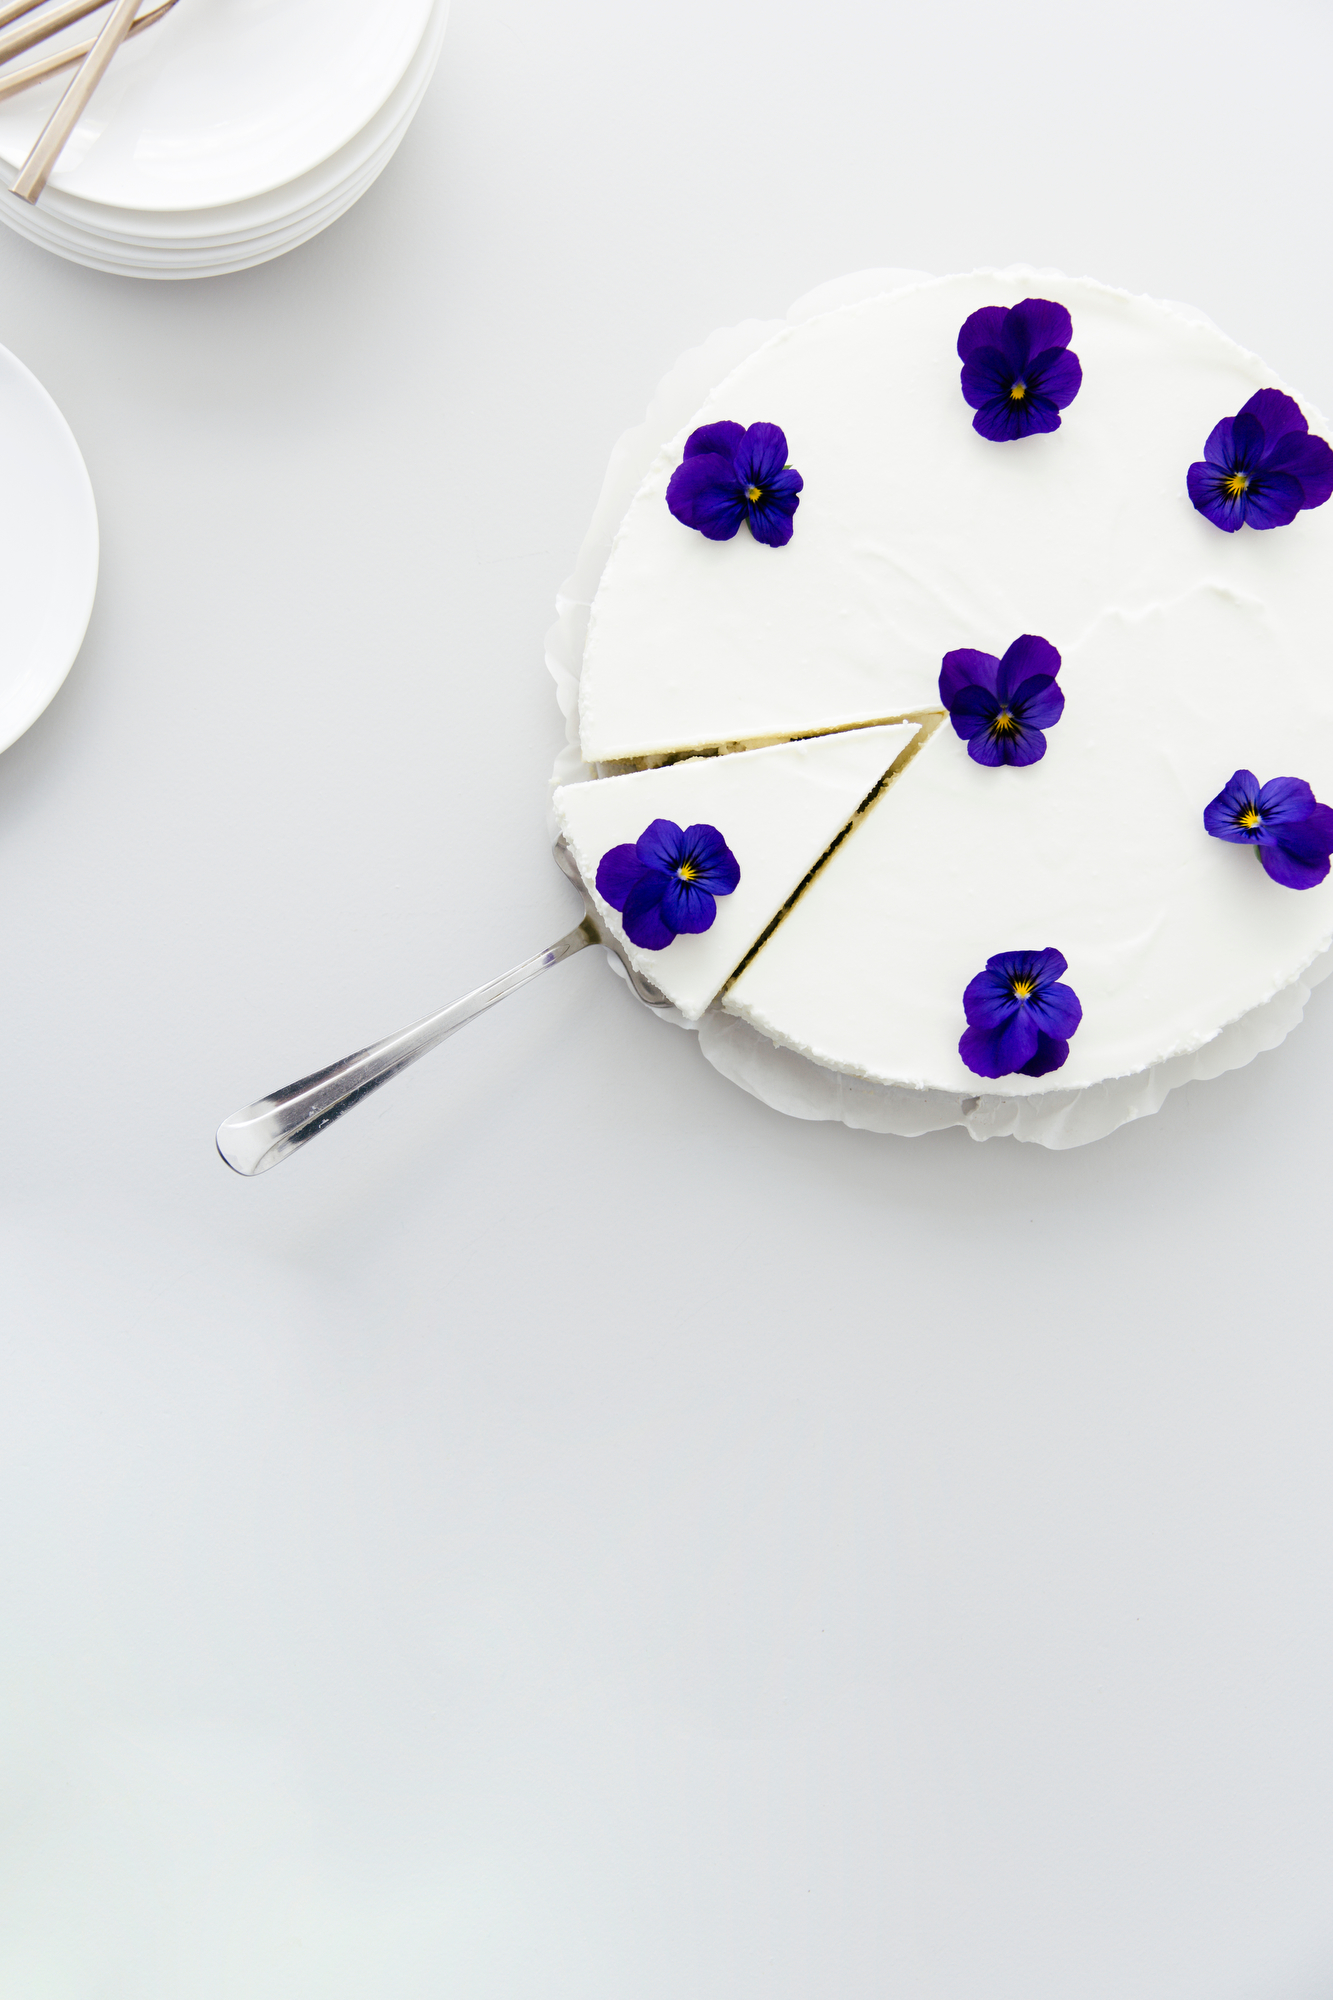 Cheesecake with flowers | photography &amp; styling by Joske Simmelink